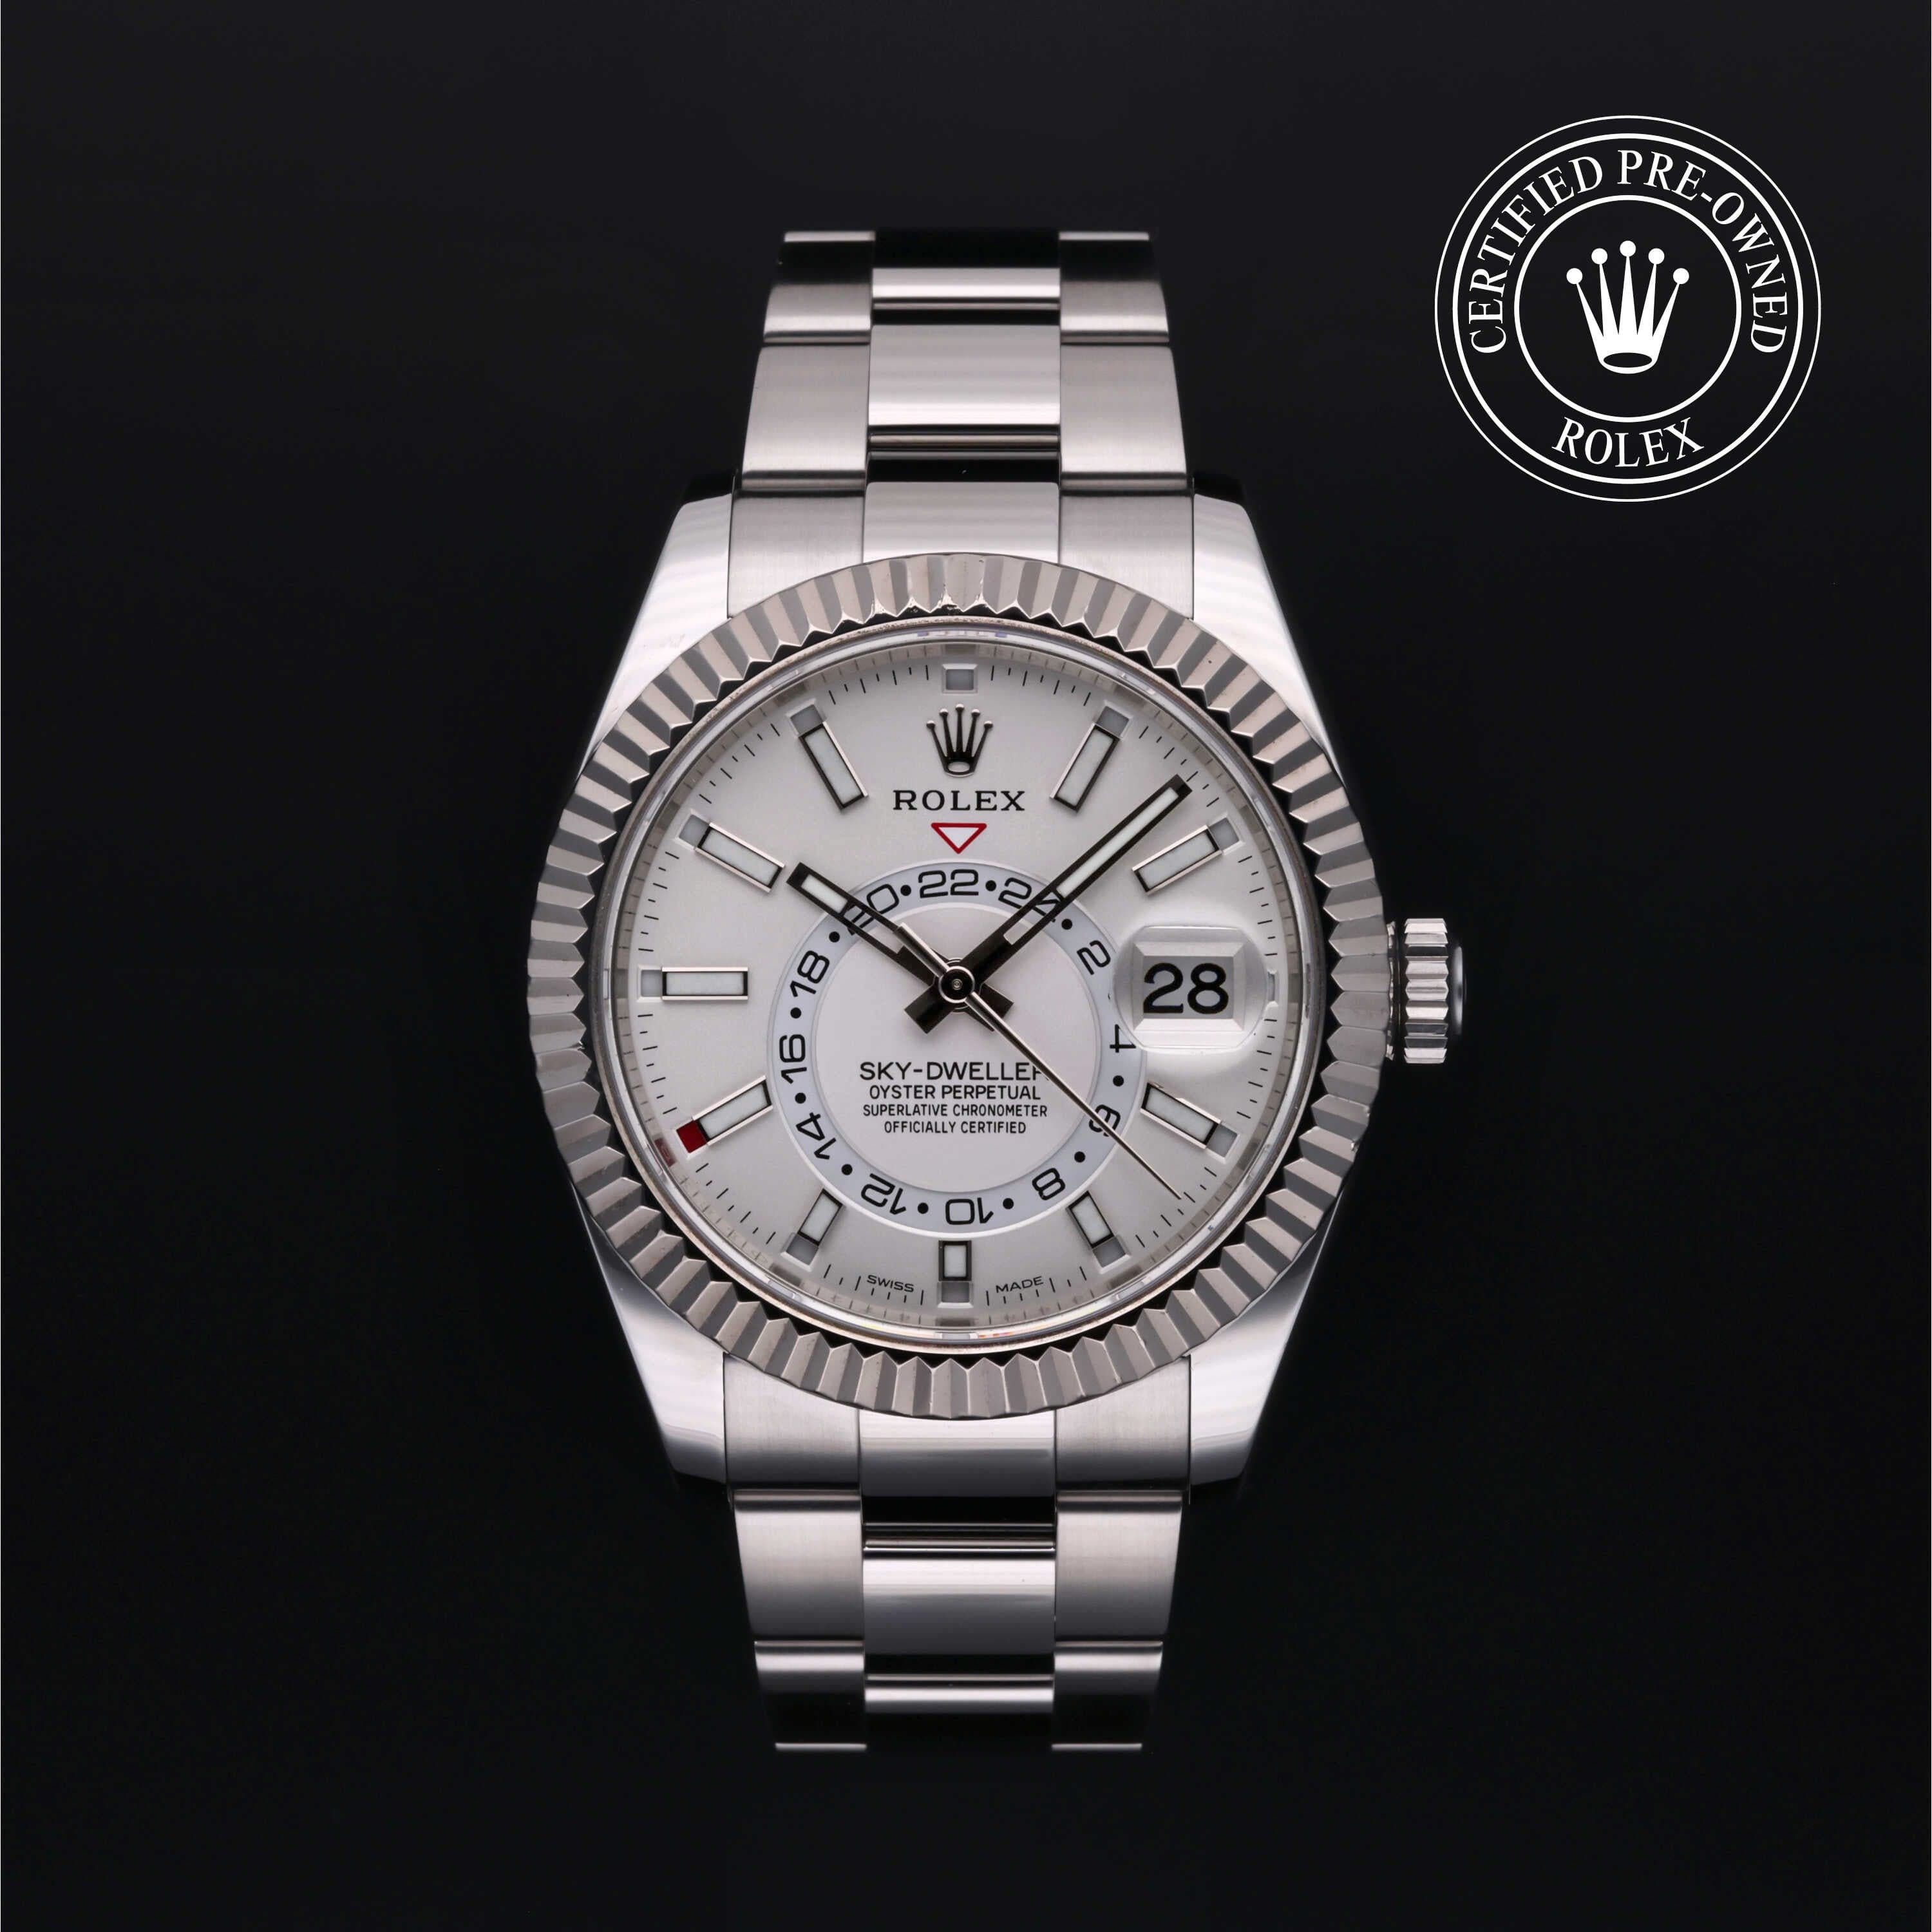 Rolex Certified Pre-Owned Sky-Dweller in Oyster, 42 mm, Stainless Steel and White Gold 326934 watch available at Long's Jewelers.